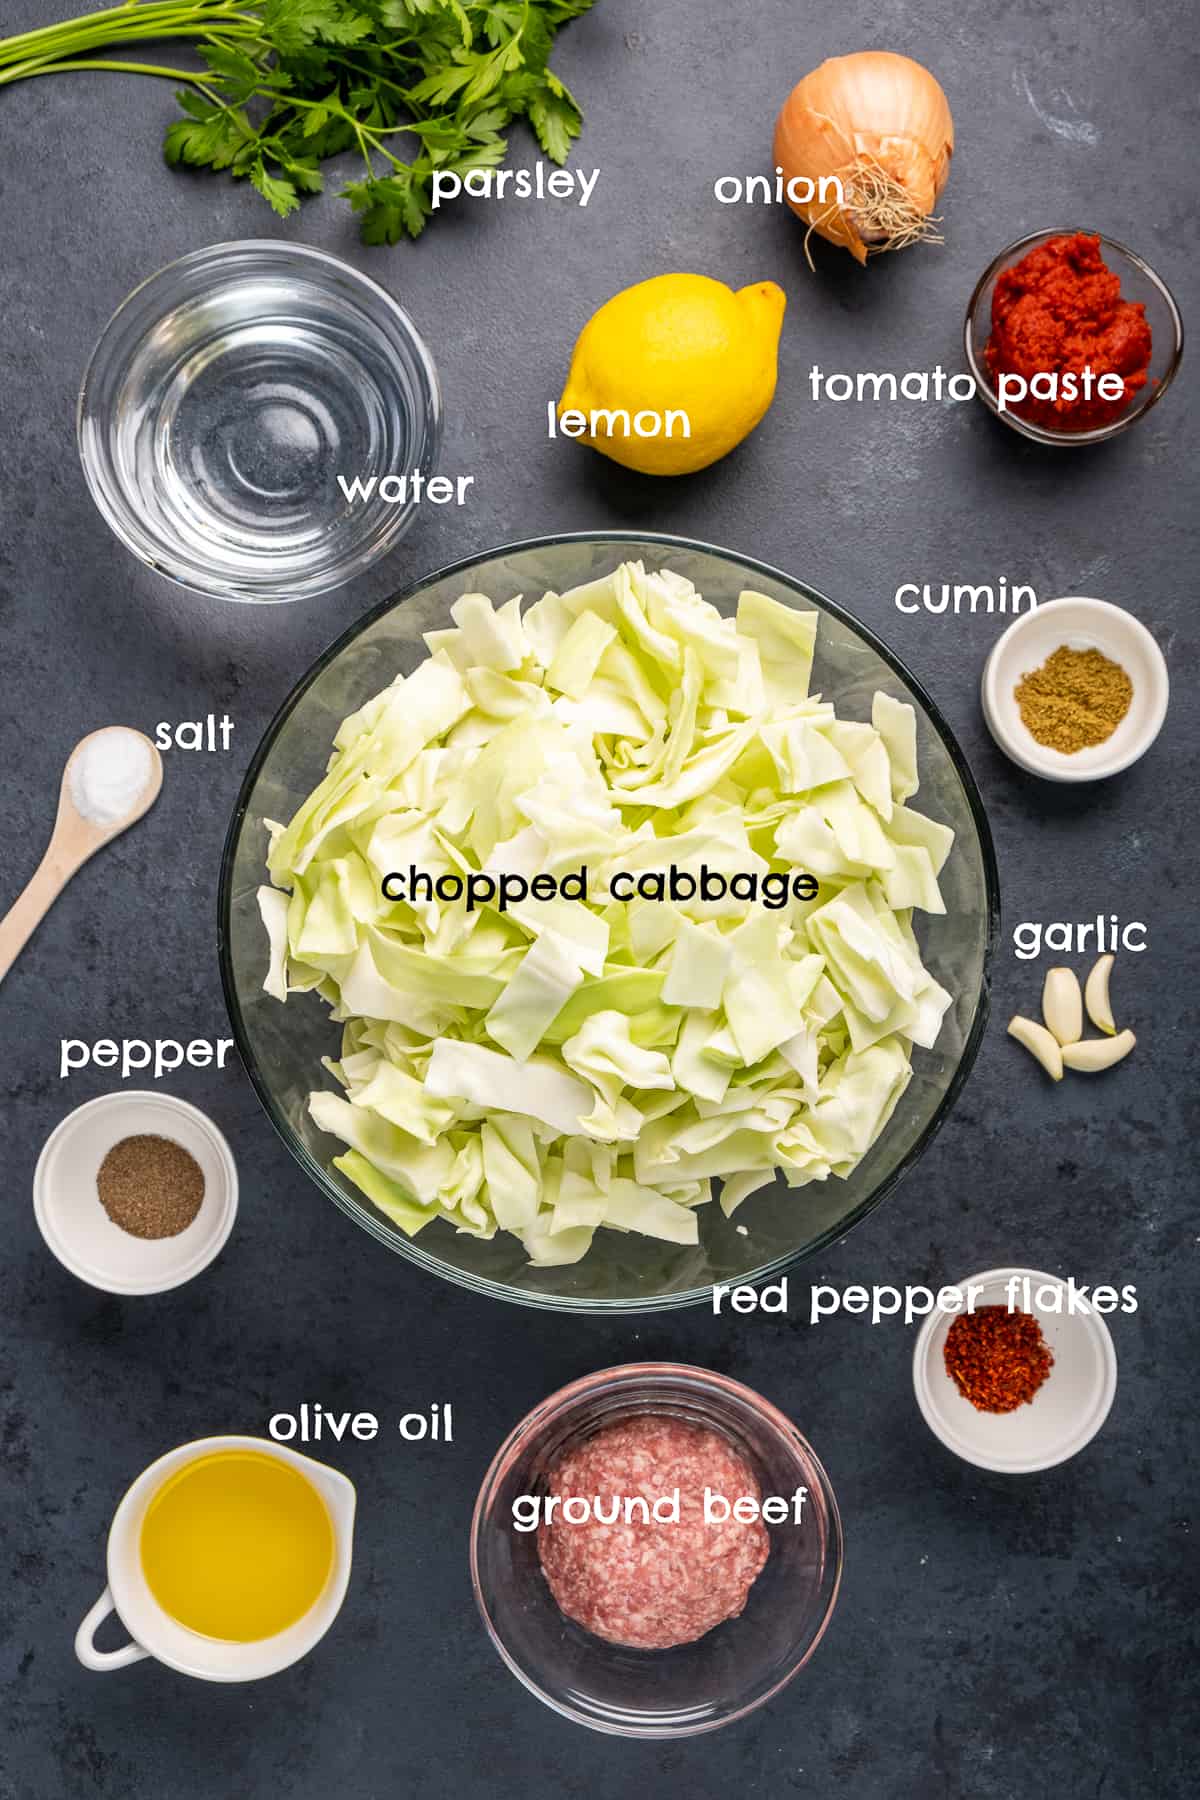 Chopped cabbage in a bowl, ground beef, olive oil, tomato paste, lemon, garlic cloves, onion, parsley, cumin, salt and pepper on a dark background.